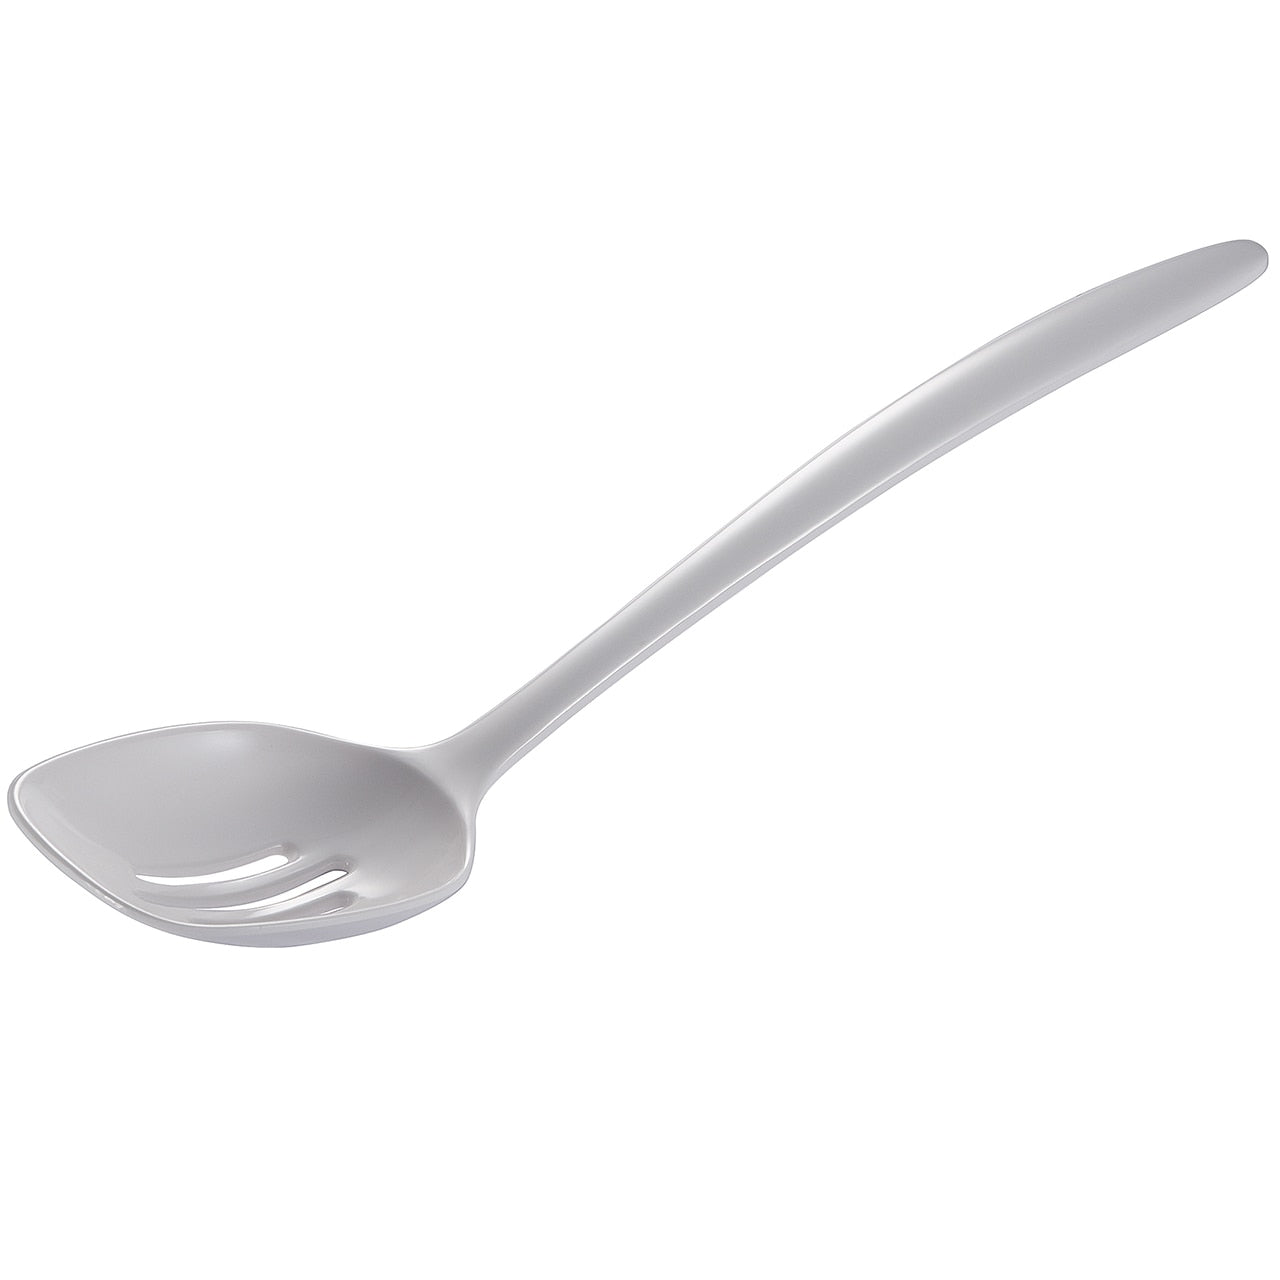 white melamine slotted spoon on a white background